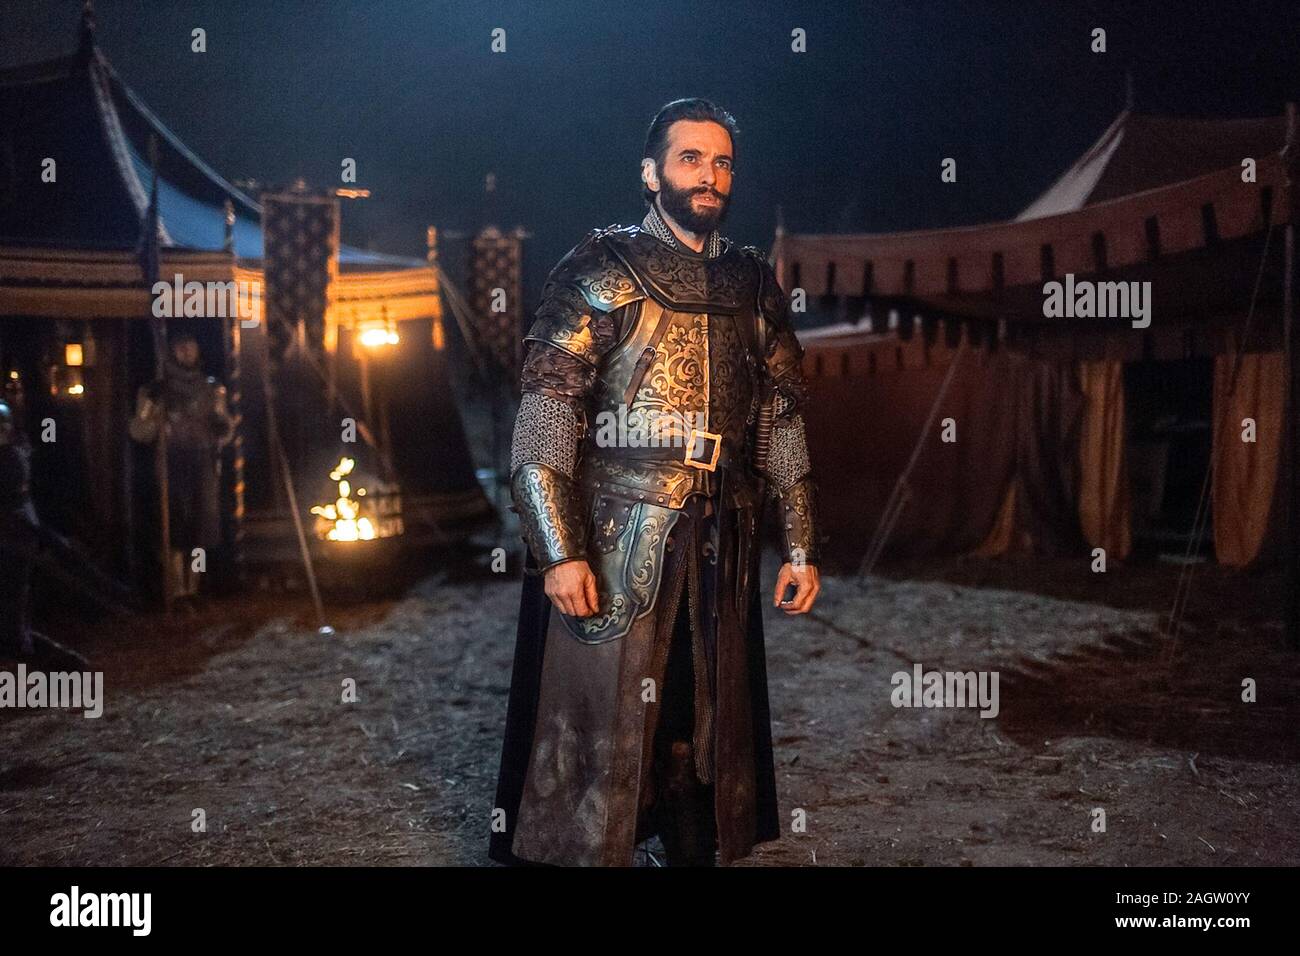 Ed Stoppard, '' Saison 2 Knightfall (2019) Credit : A&E Television Networks  / Les archives d'Hollywood Photo Stock - Alamy